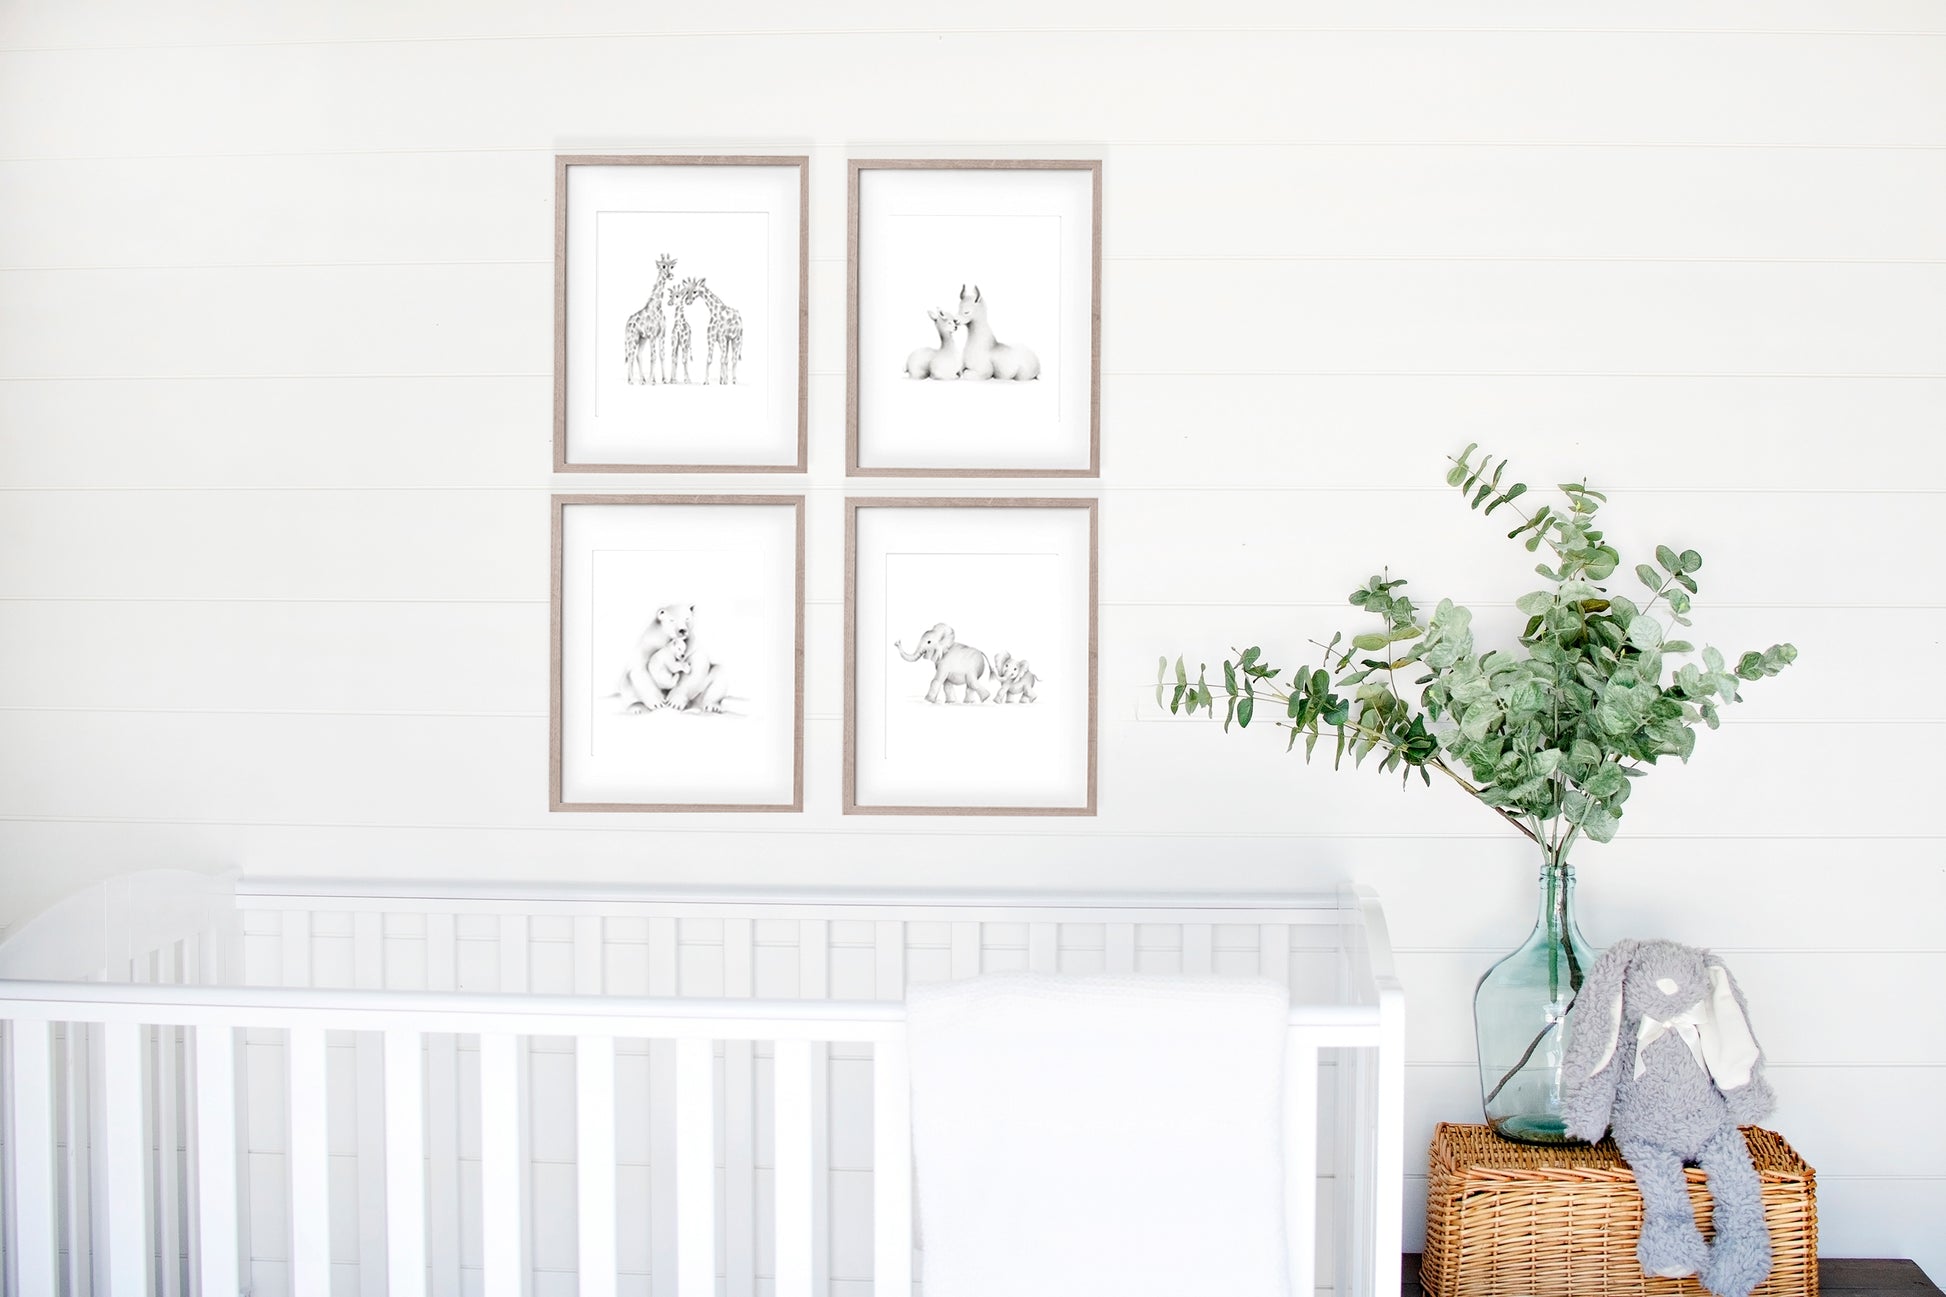 Set of 4 animal family sketch art prints for a nursery. Prints are in wood frames hanging above a white crib - Studio Q - Art by Nicky